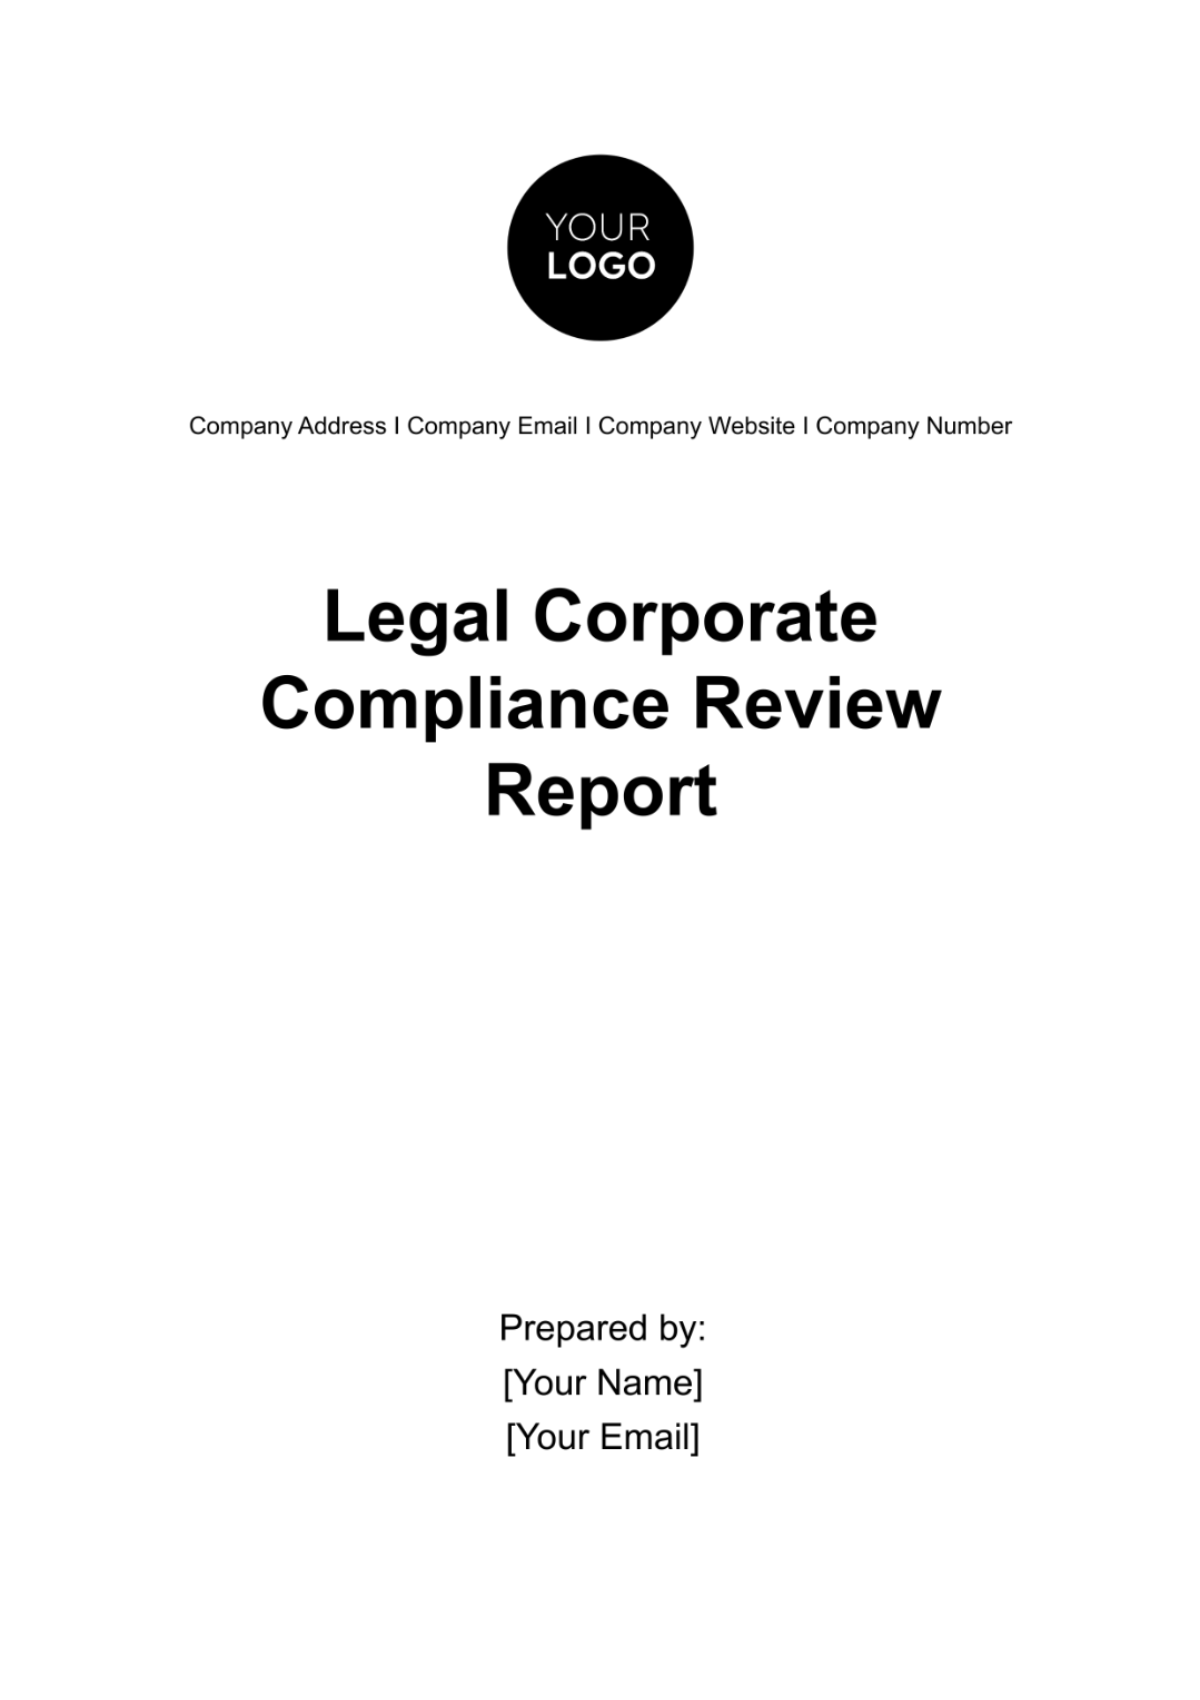 Legal Corporate Compliance Review Report Template